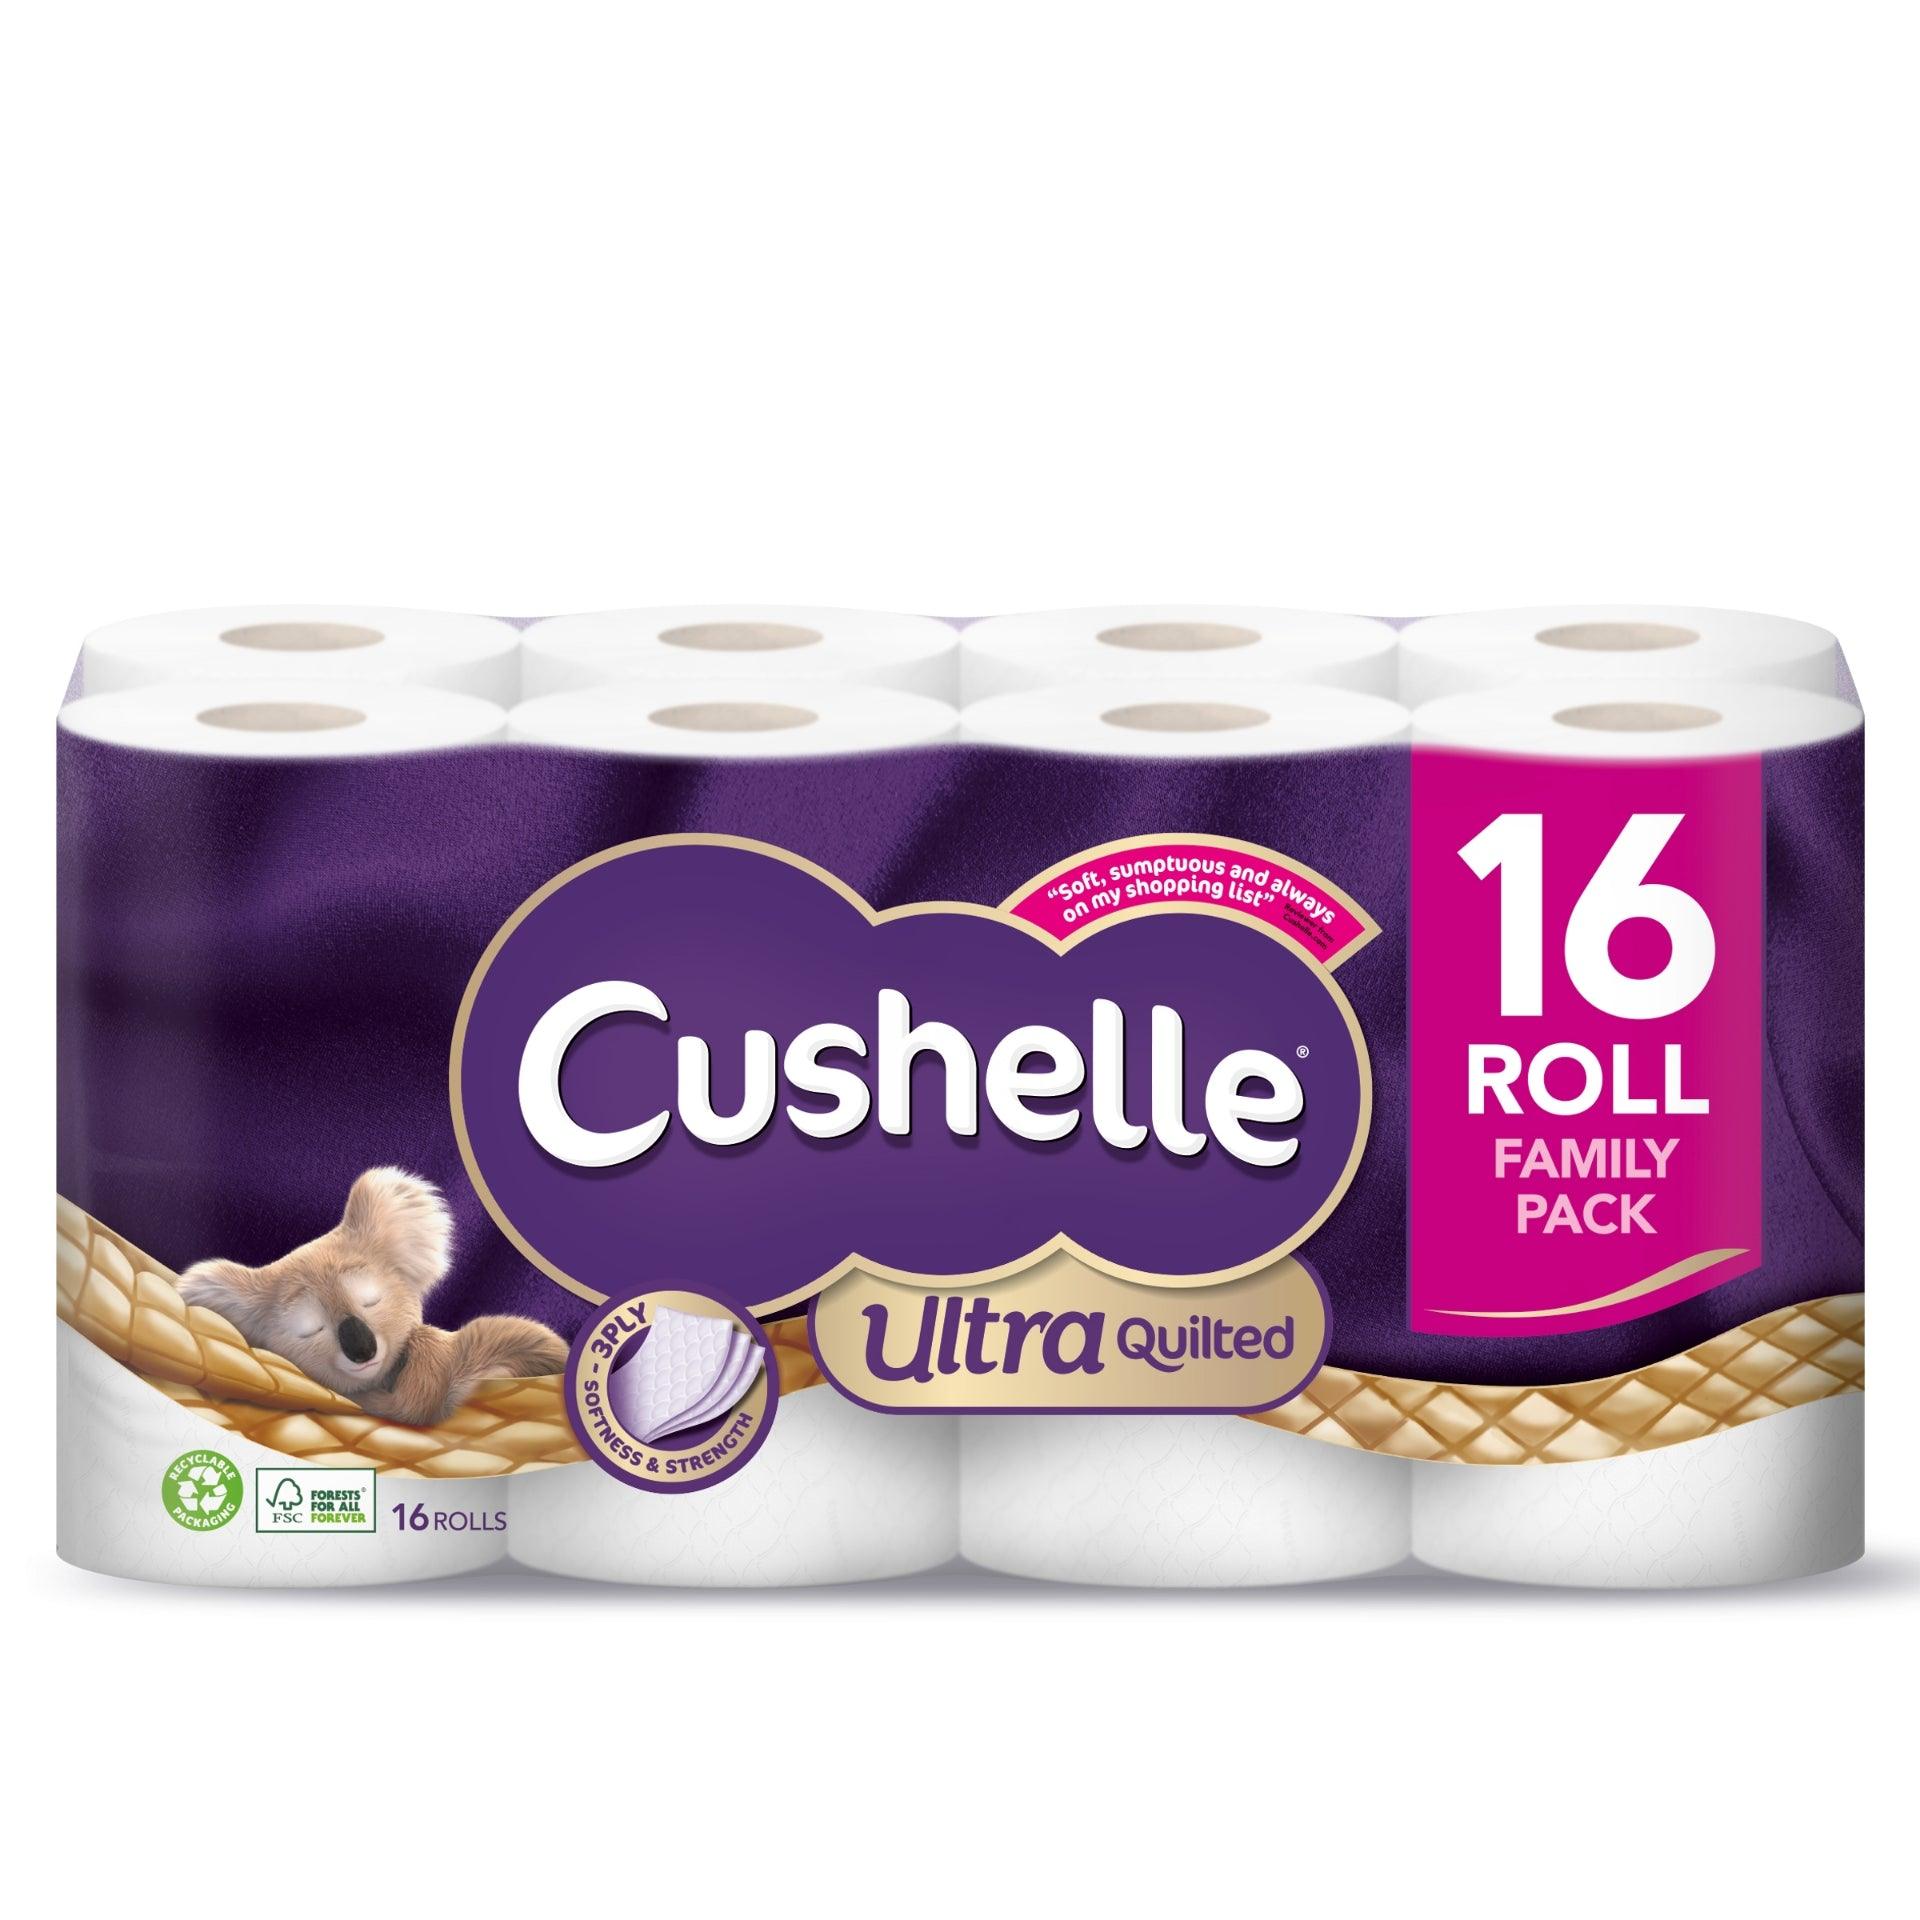 Cushelle Ultra Quilted Toilet Roll Family Pack - 16 Rolls - Vending Superstore